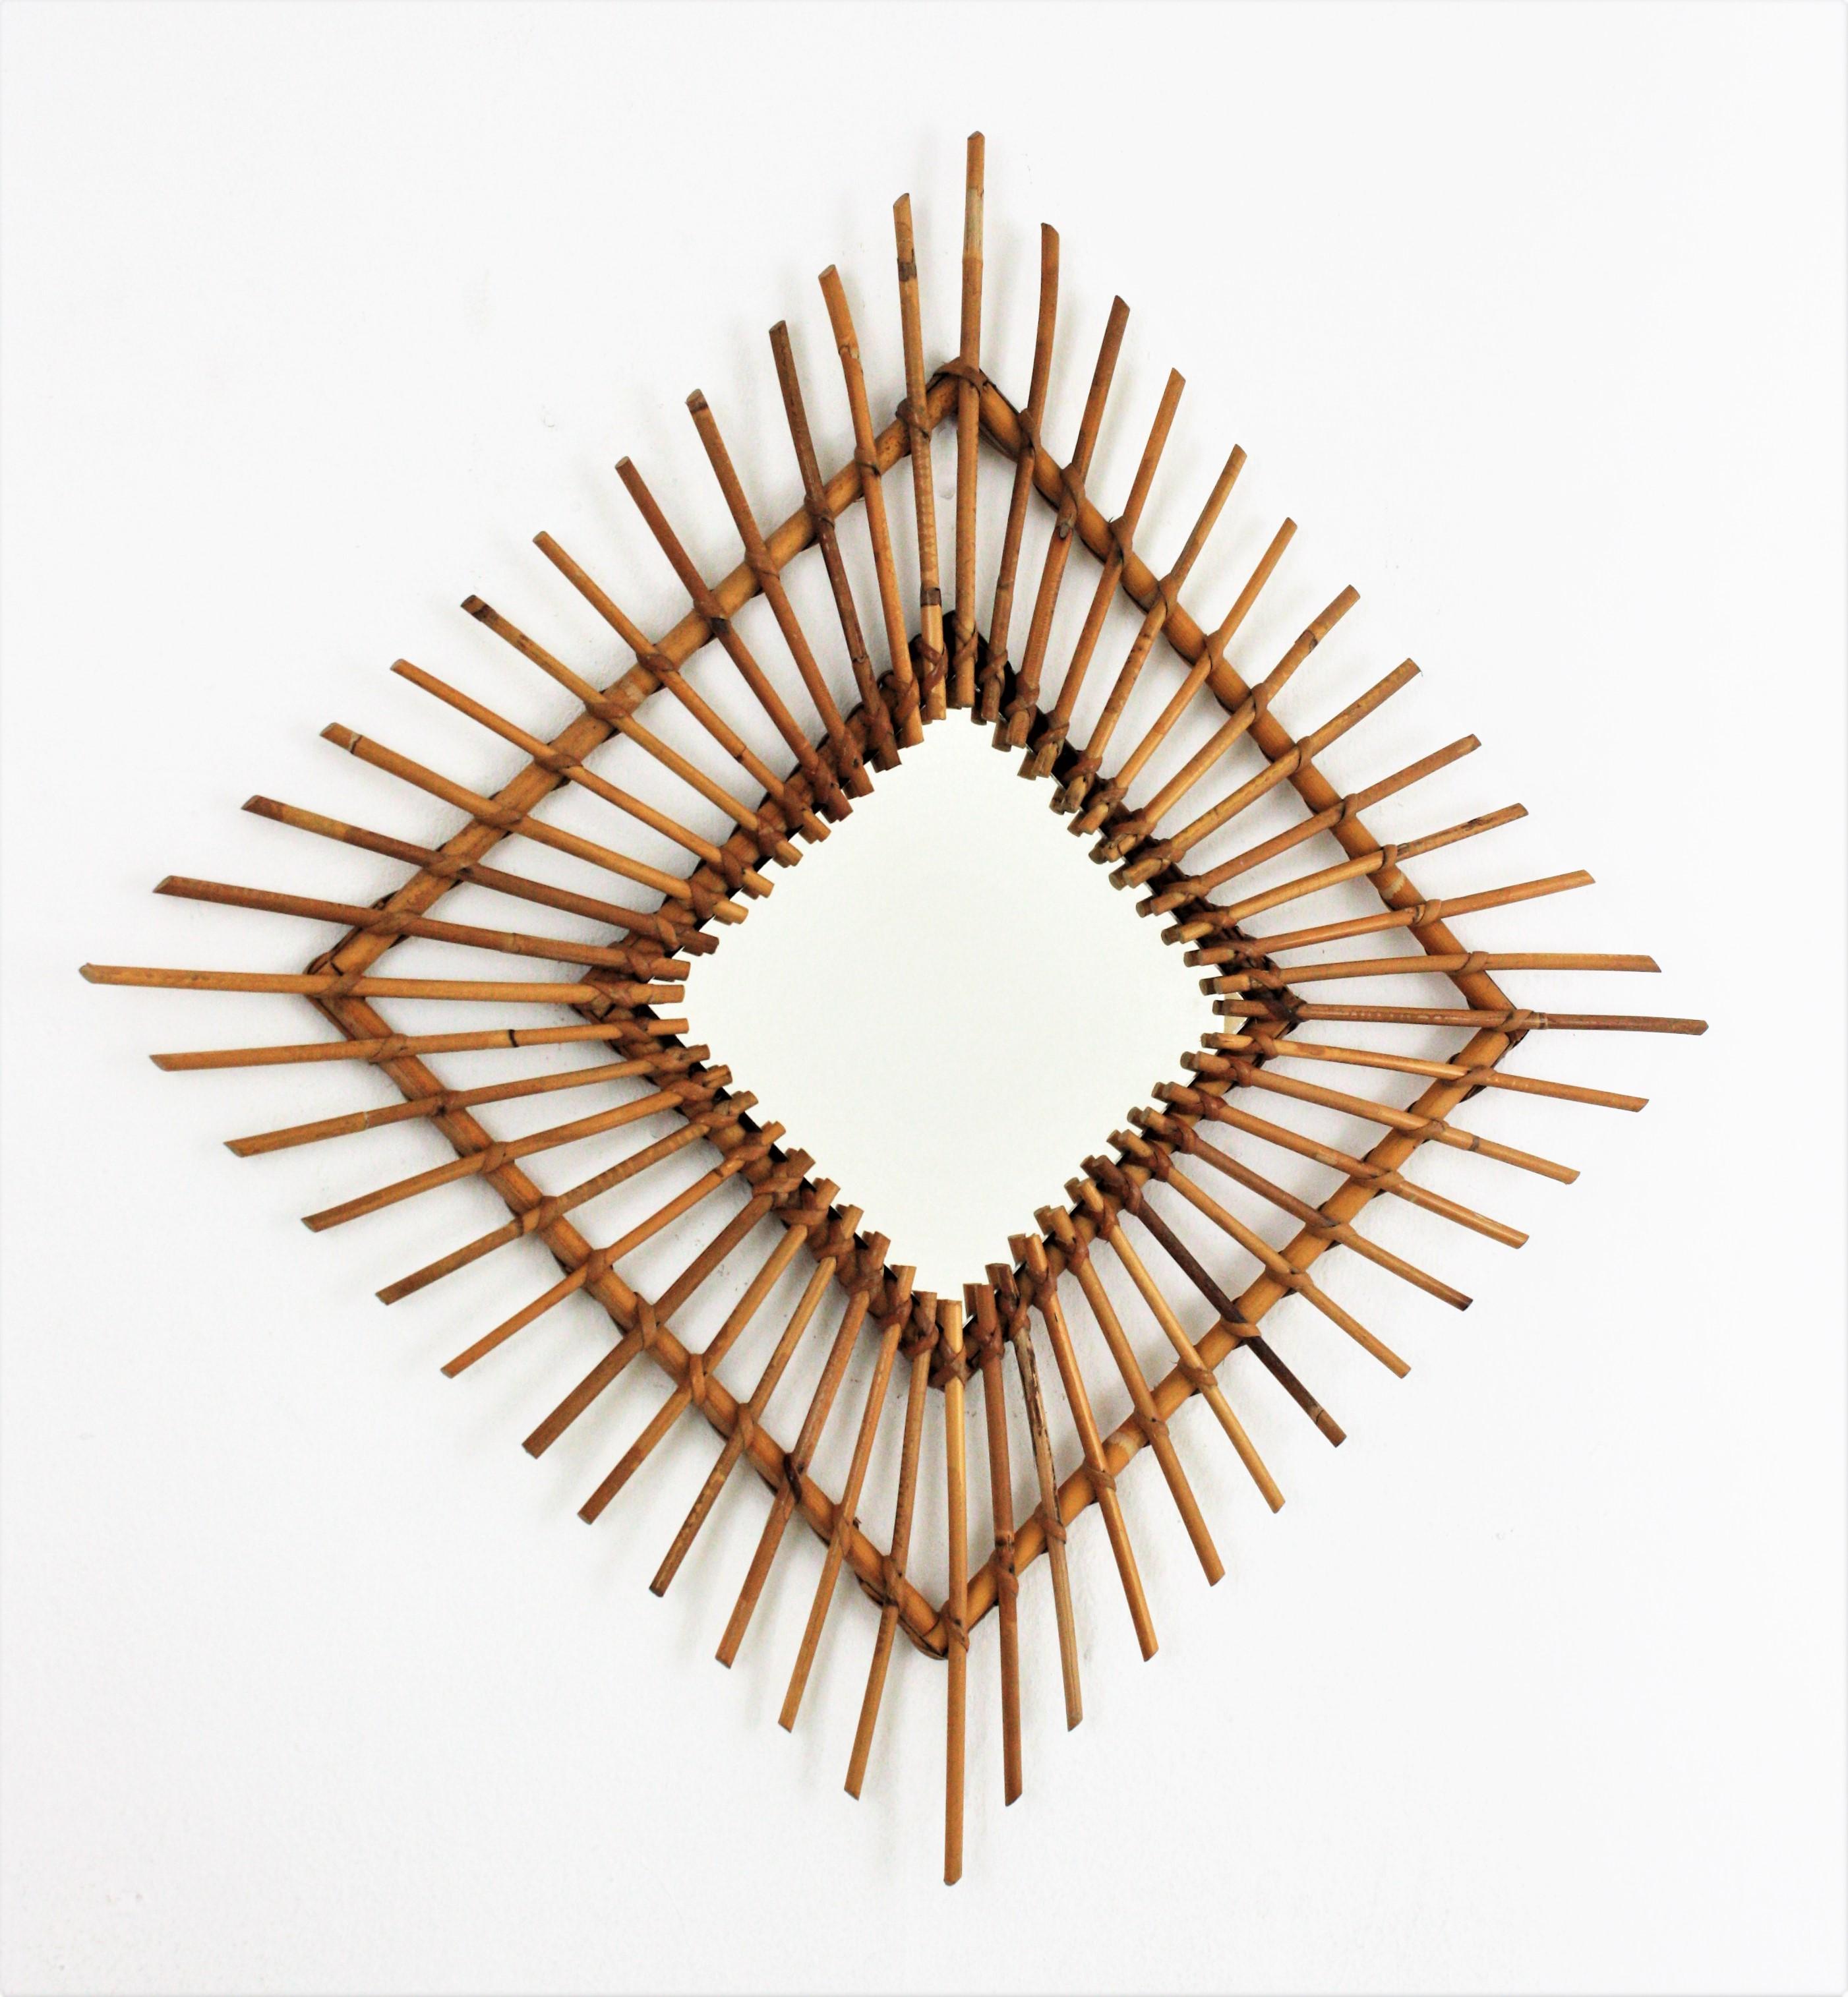 Handcrafted Mediterranean style rattan or wicker cane rhombus shaped mirror, Spain, 1960s.
This rattan mirror can be placed in two positions, as a rhombus or square. It will be a nice choice for a beach house or countryside house decoration or to